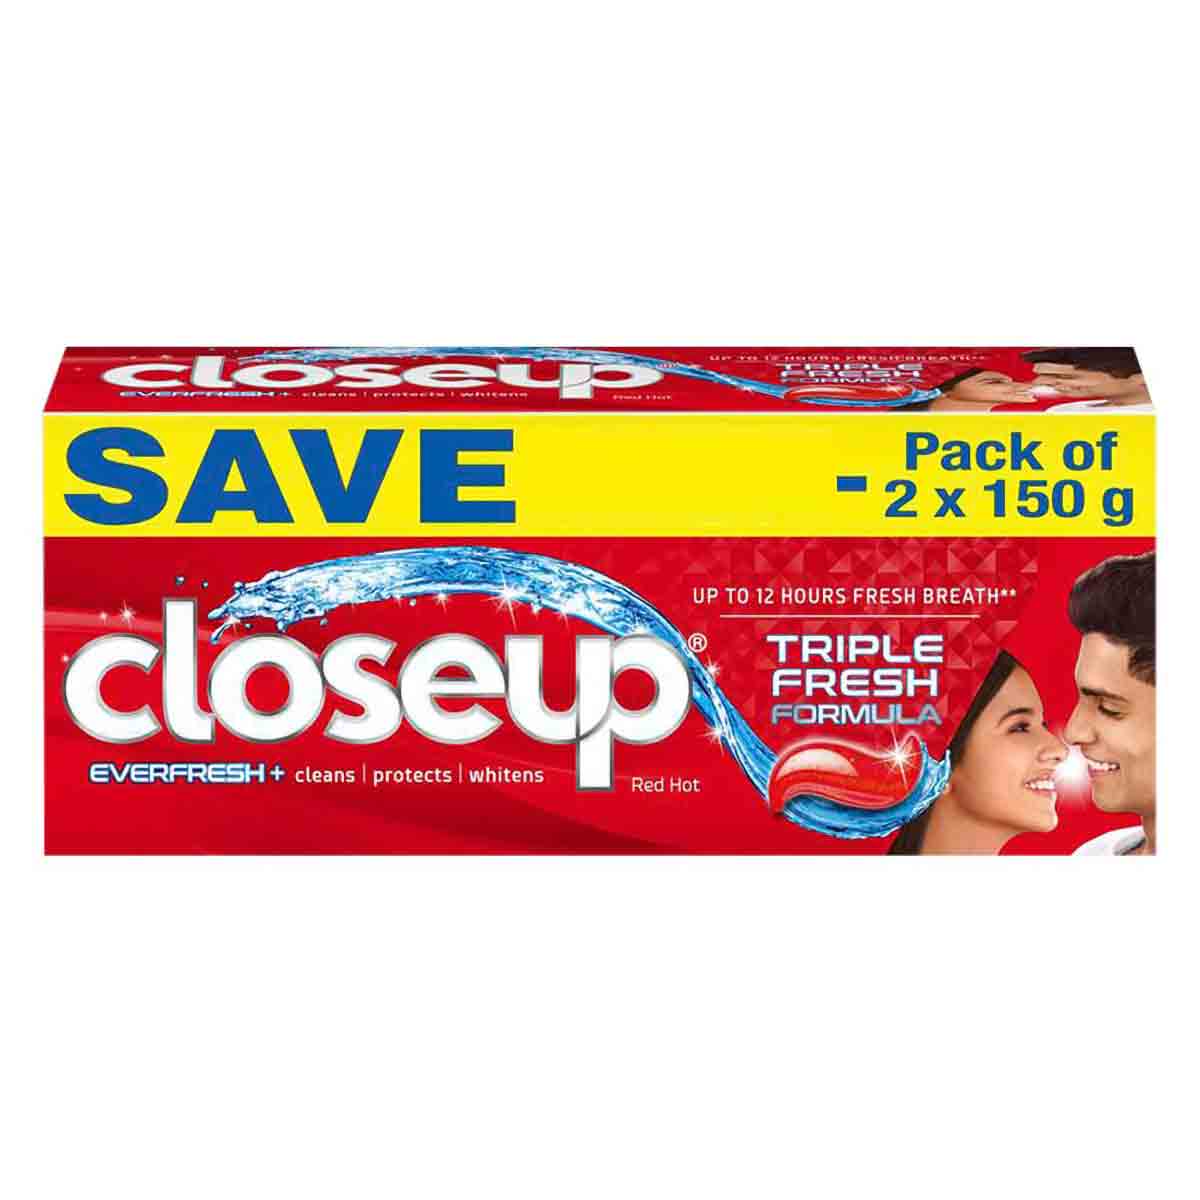 Buy Closeup Ever Fresh+ Gel Red Hot Toothpaste, 300 gm (2x150 gm) Online